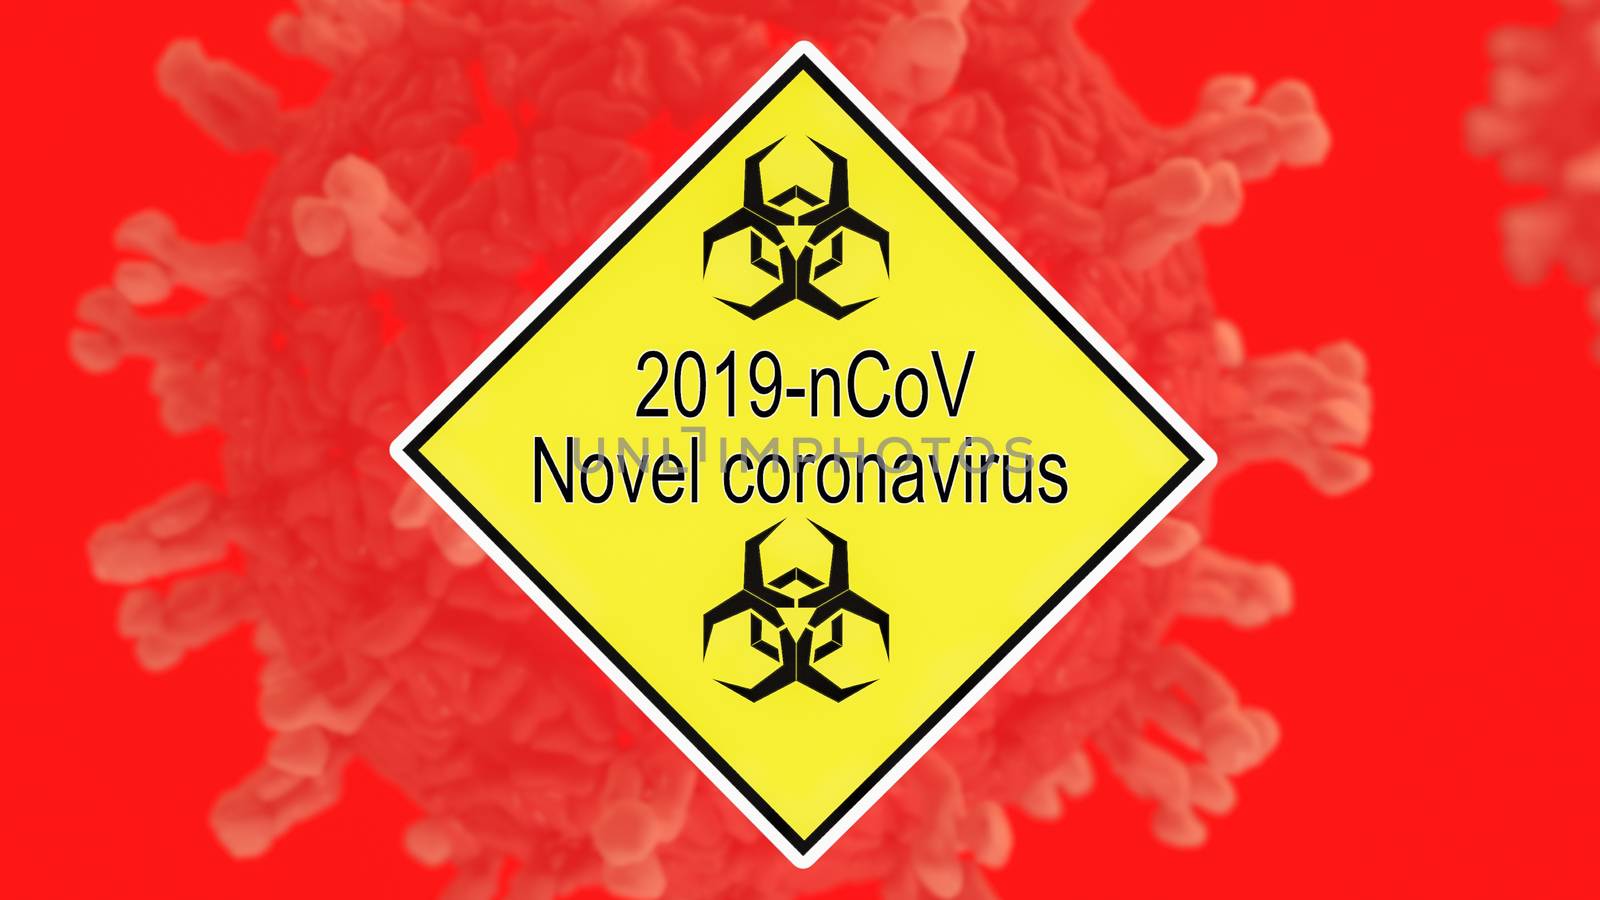 Yellow danger sign with biohazard logo before blurred virus cell depiction for Wuhan Novel virus potential spread.